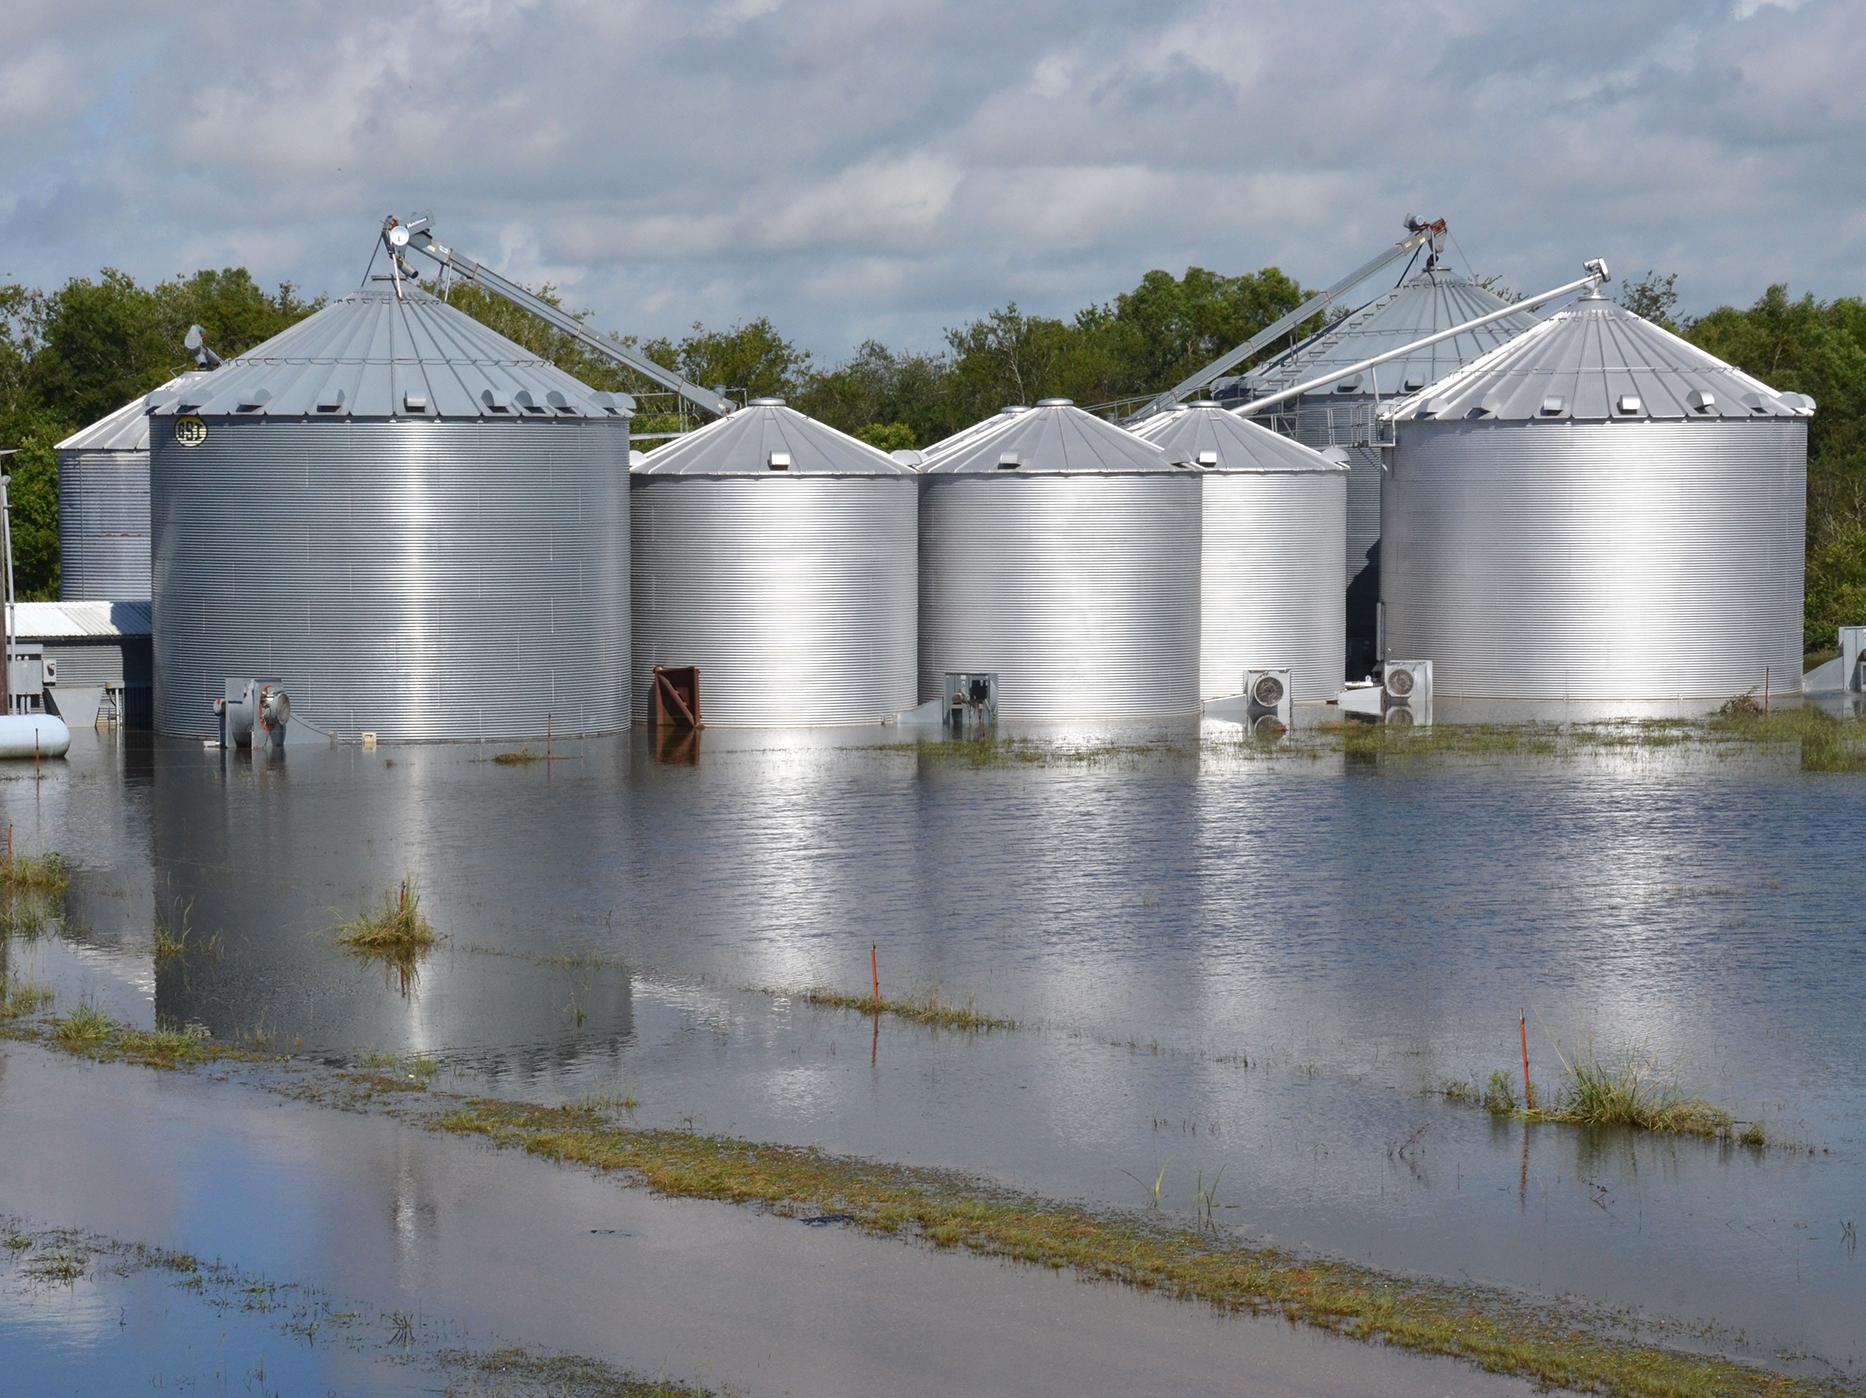 Flooded grain bins in Crowley, Louisiana, are among the many problems Louisiana producers are facing after historic flooding caused more than $100 million in damage to the state’s agriculture. Mississippi State University Extension Service personnel have worked with state hay growers to send forage to producers in Louisiana affected by flooding earlier this month. (Photo by Louisiana State University AgCenter Communications/Bruce Schultz)